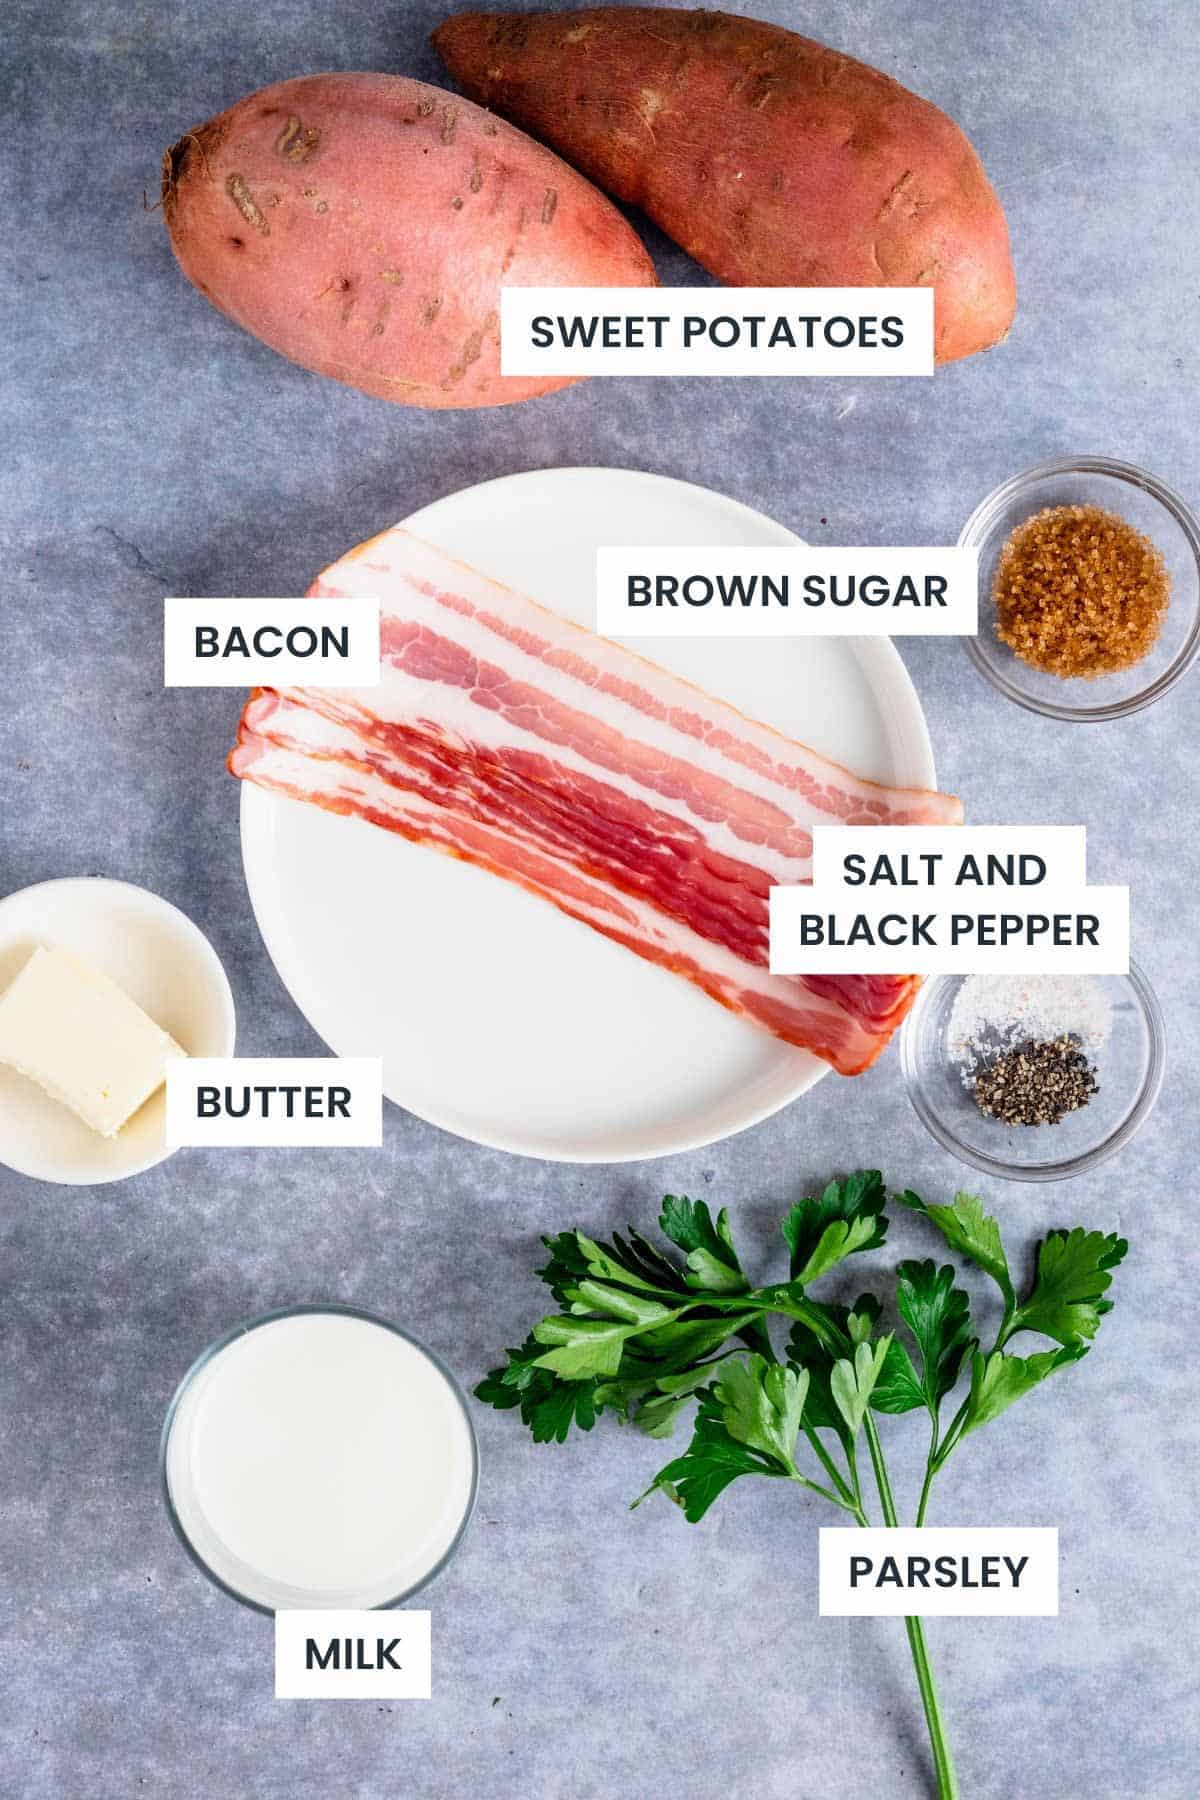 Whipped Sweet Potatoes Ingredients